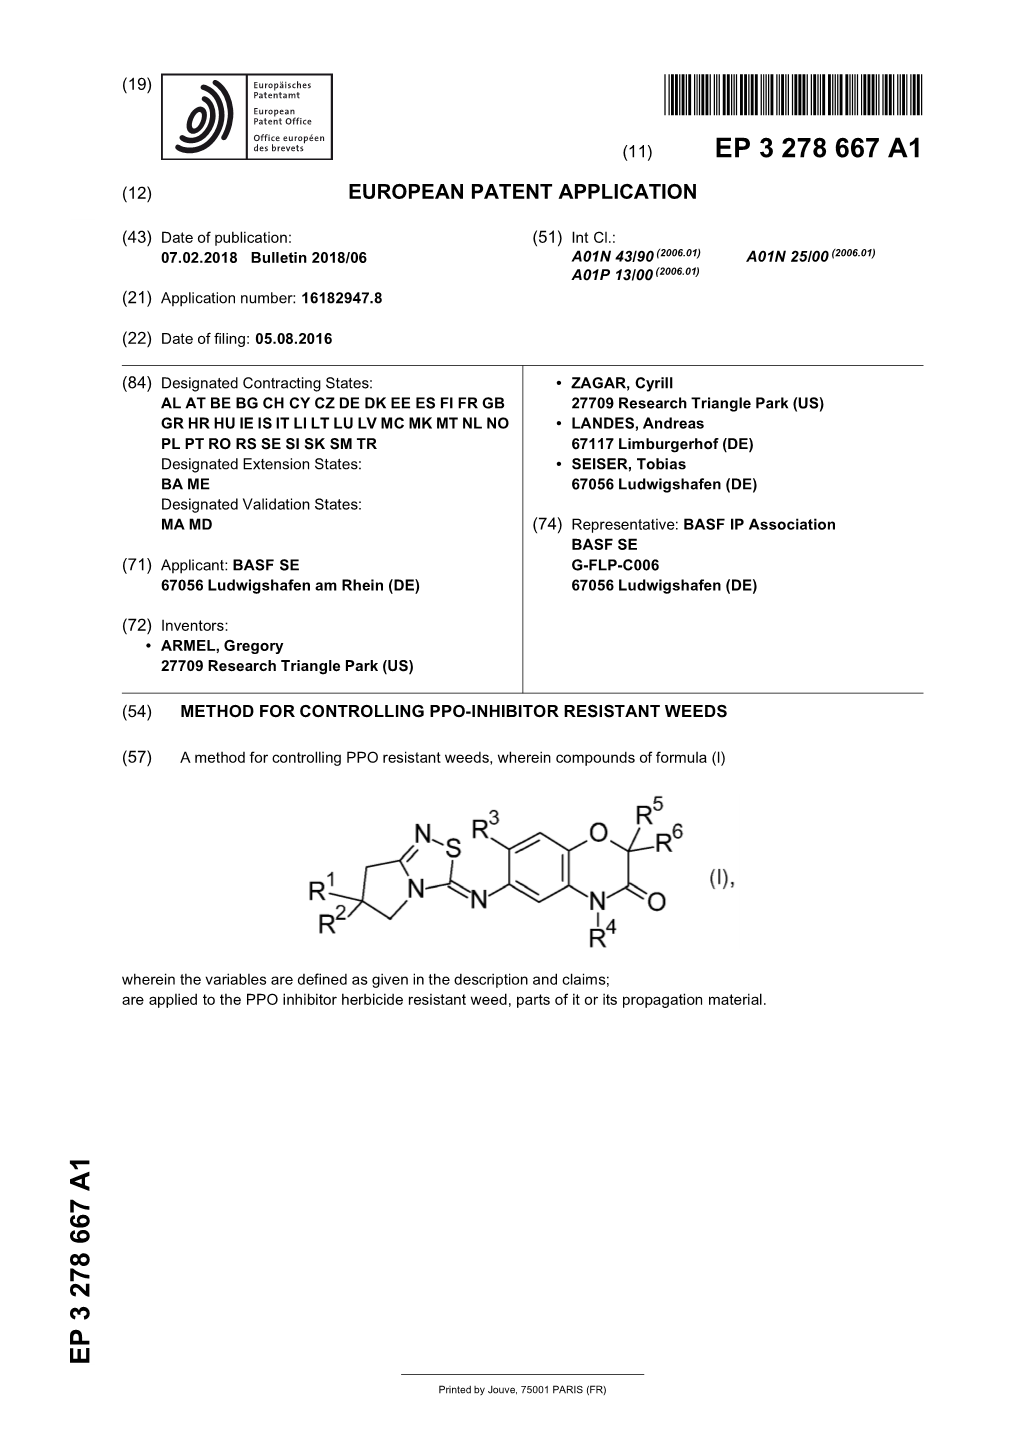 Method for Controlling Ppo-Inhibitor Resistant Weeds